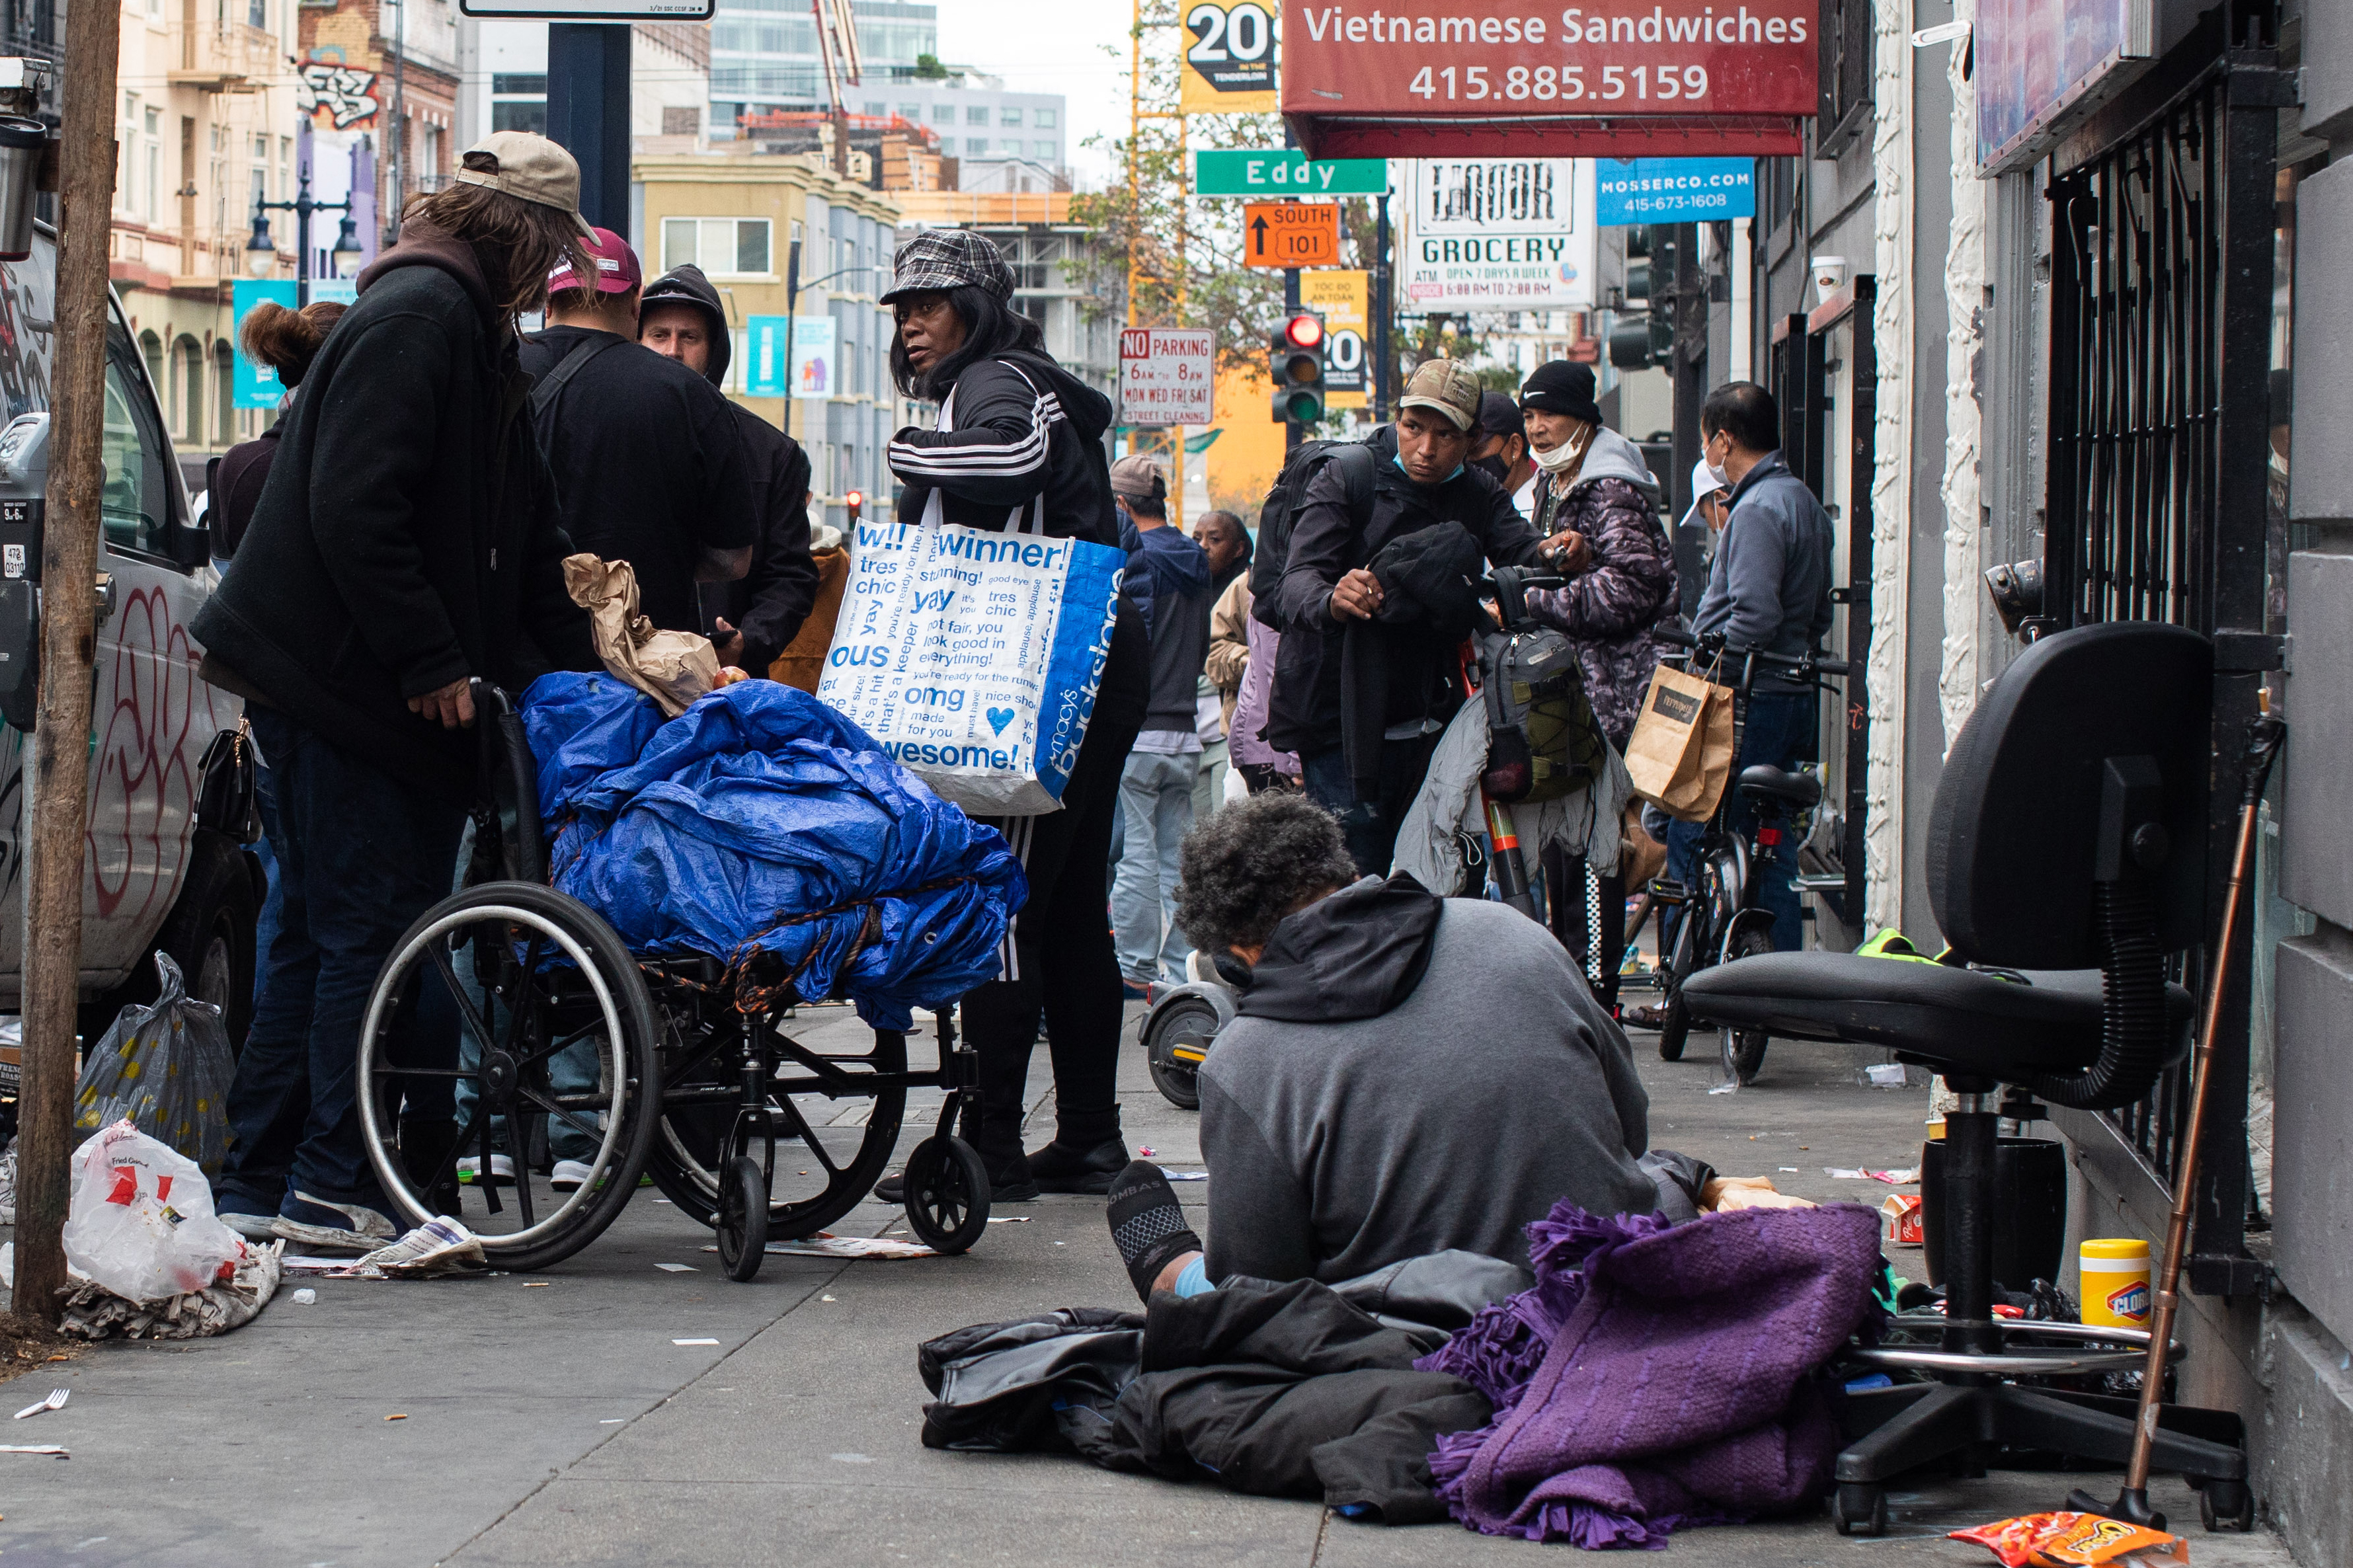 An urban street scene with people gathered, some standing, one seated on the ground, amidst litter and a wheelchair with belongings.